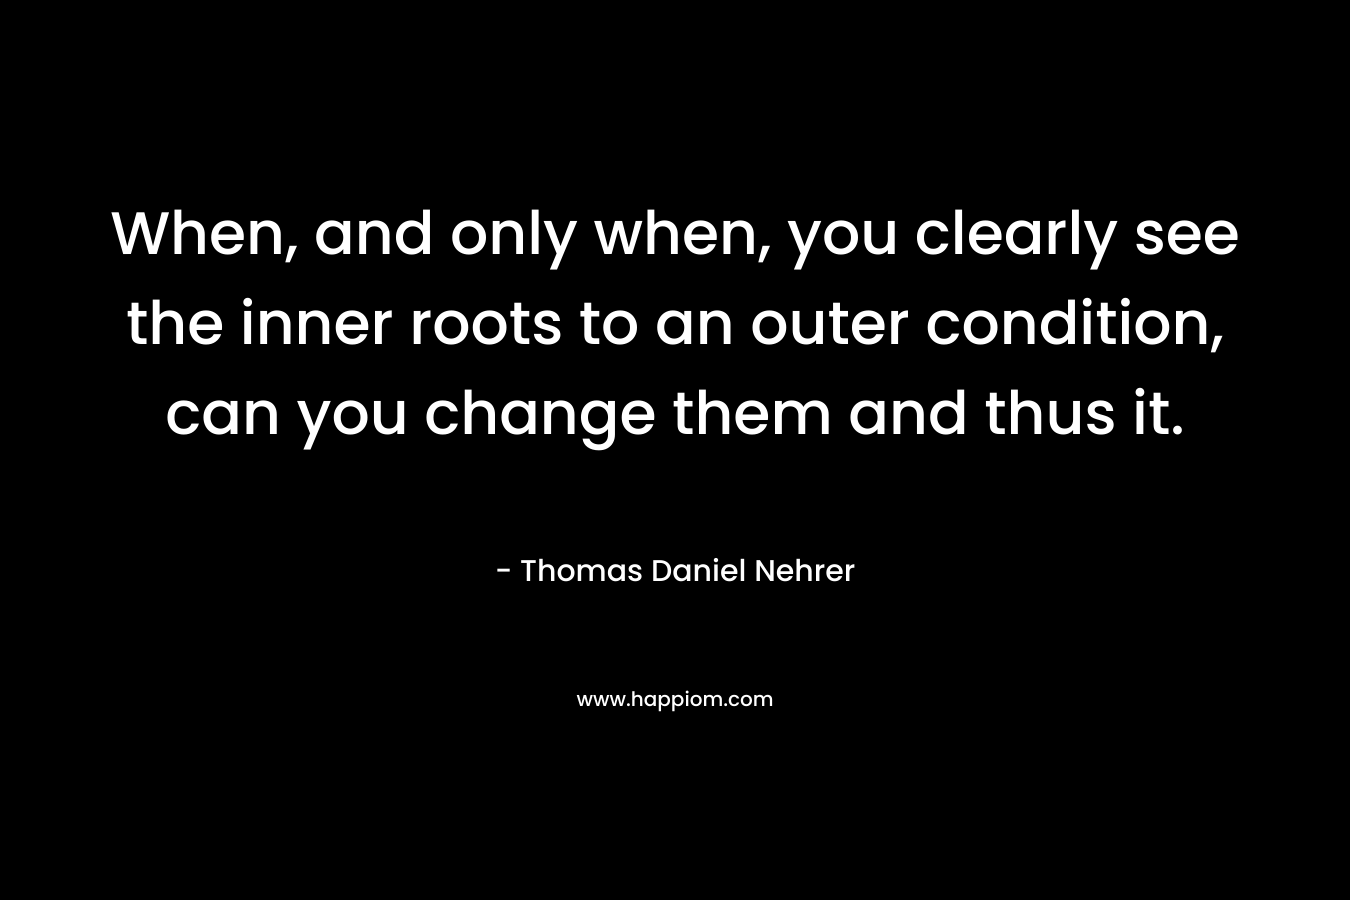 When, and only when, you clearly see the inner roots to an outer condition, can you change them and thus it.